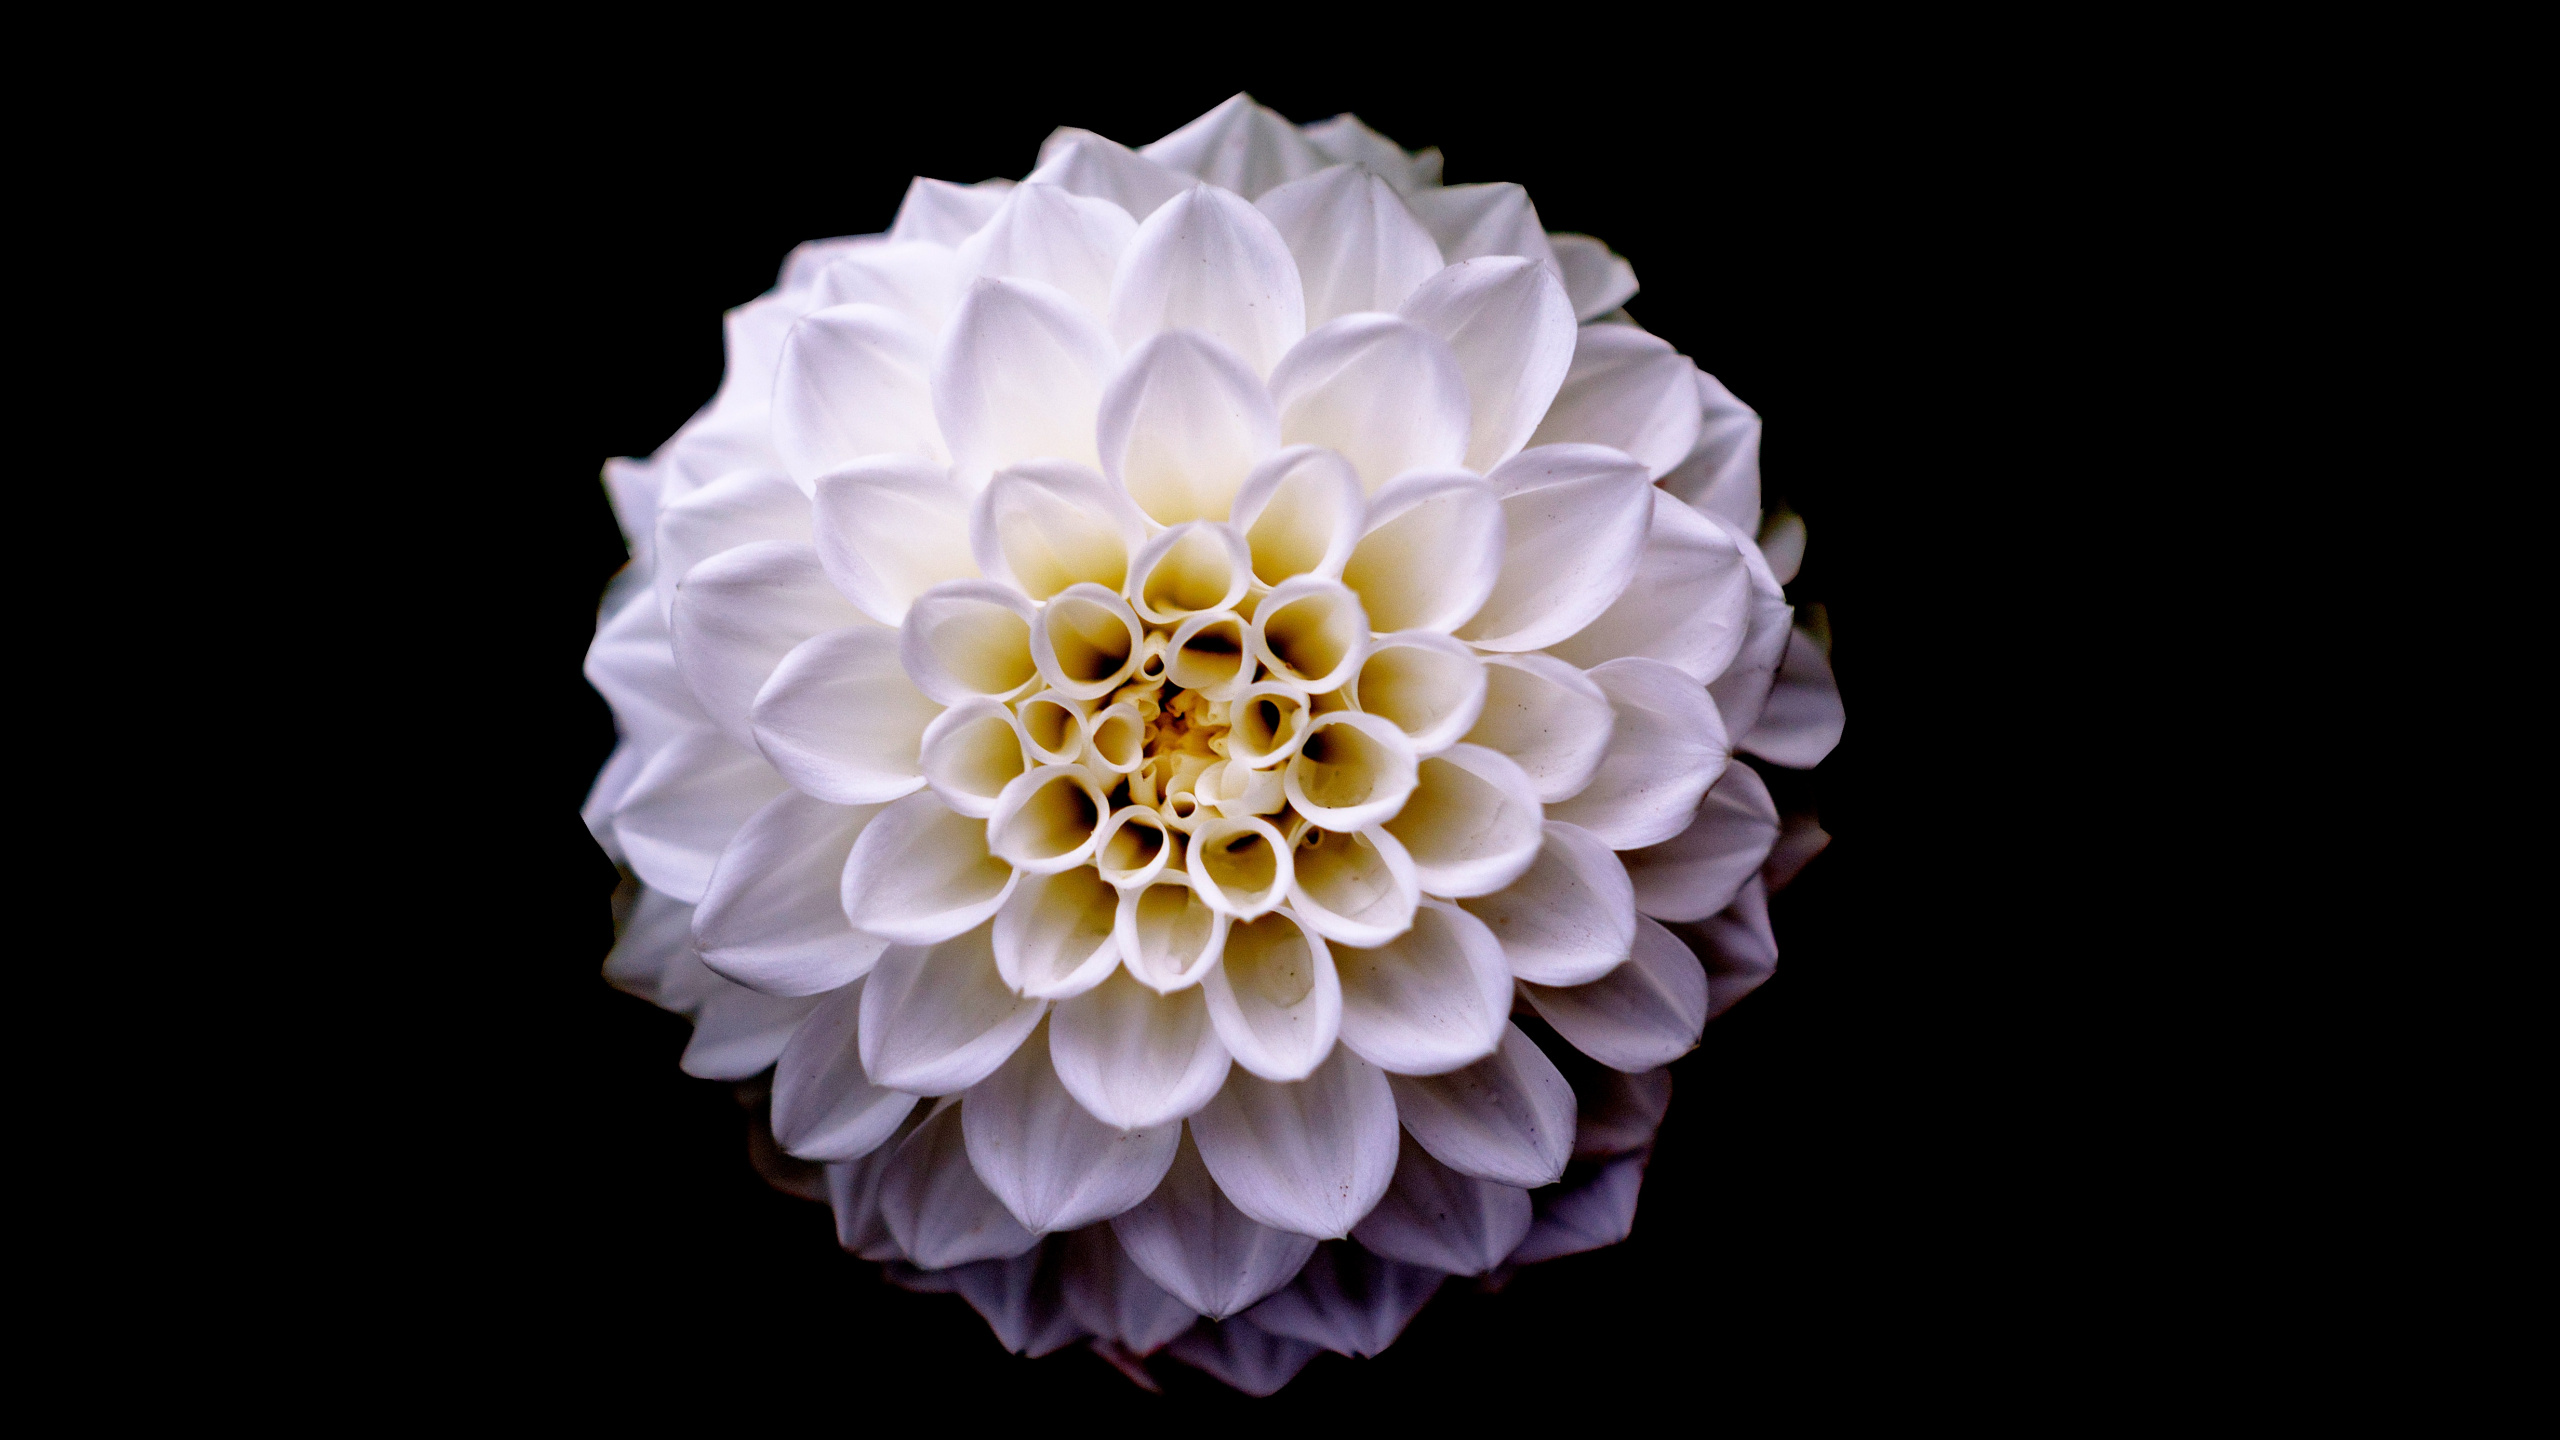 White Flower With Black Background. Wallpaper in 2560x1440 Resolution